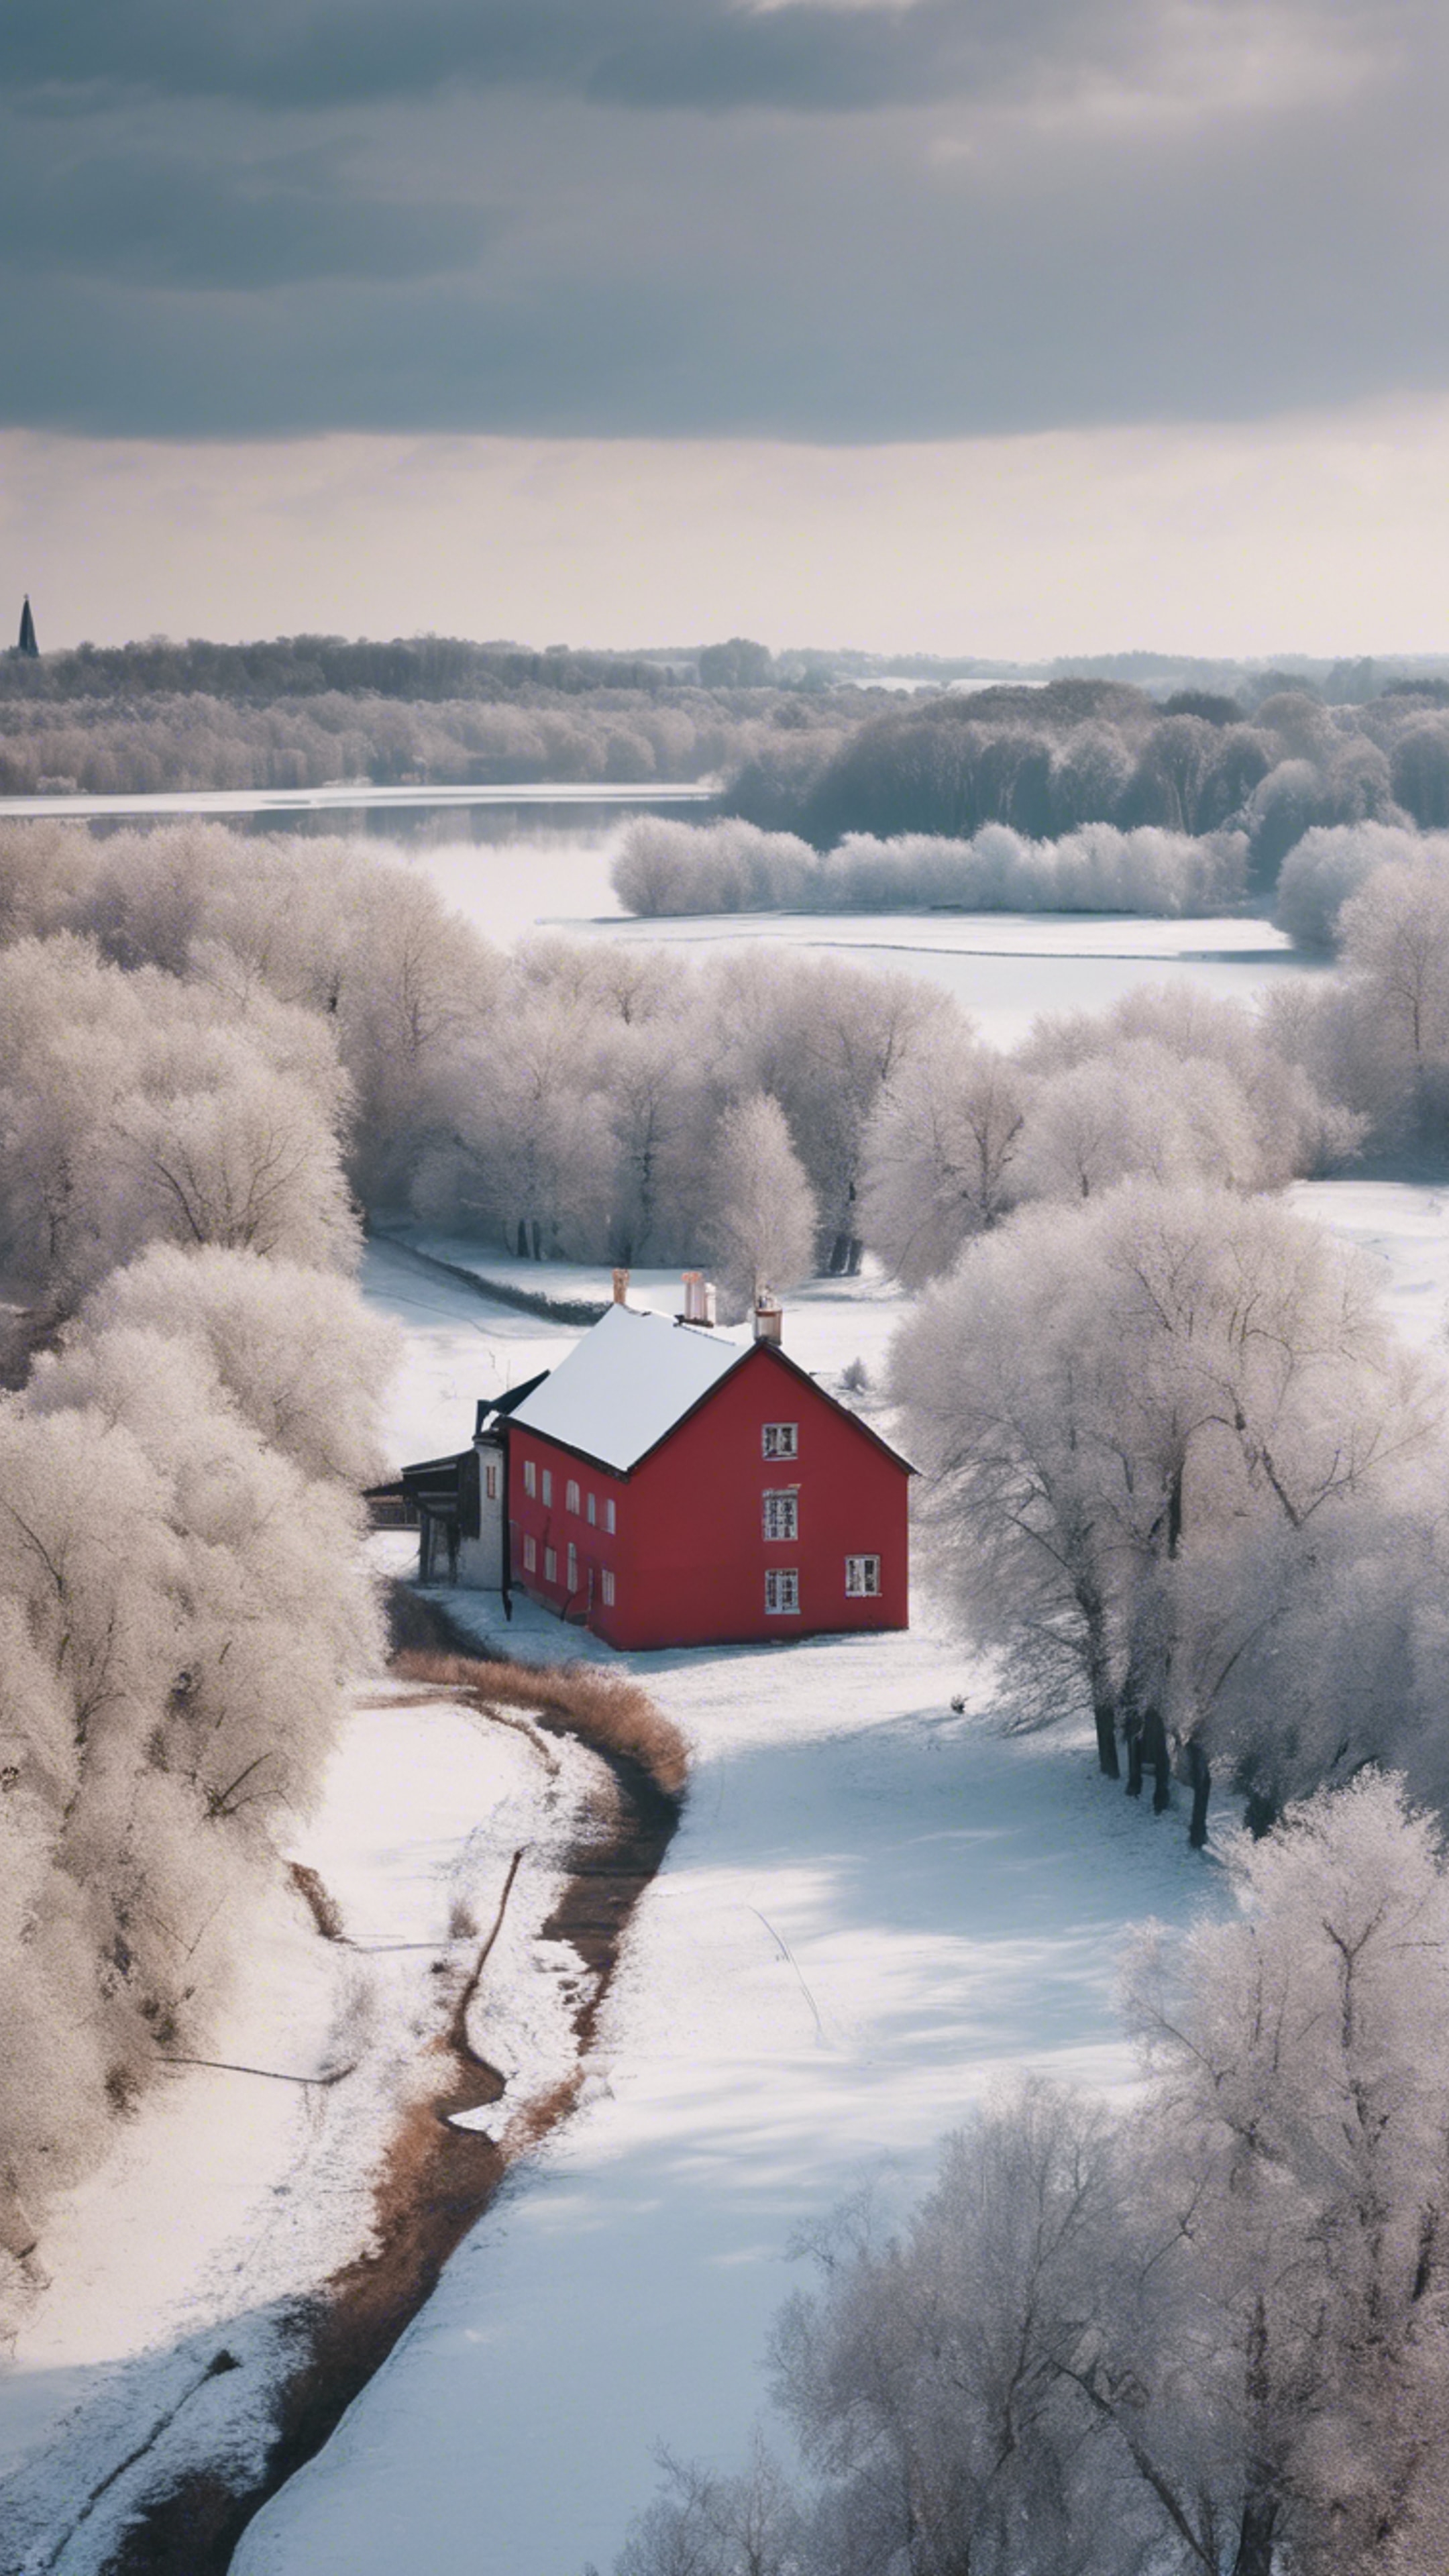 A snow-covered French country landscape with bare trees, a frozen river, and a small red-roofed house in the distance. Tapeta[86a496d4055745a5962e]